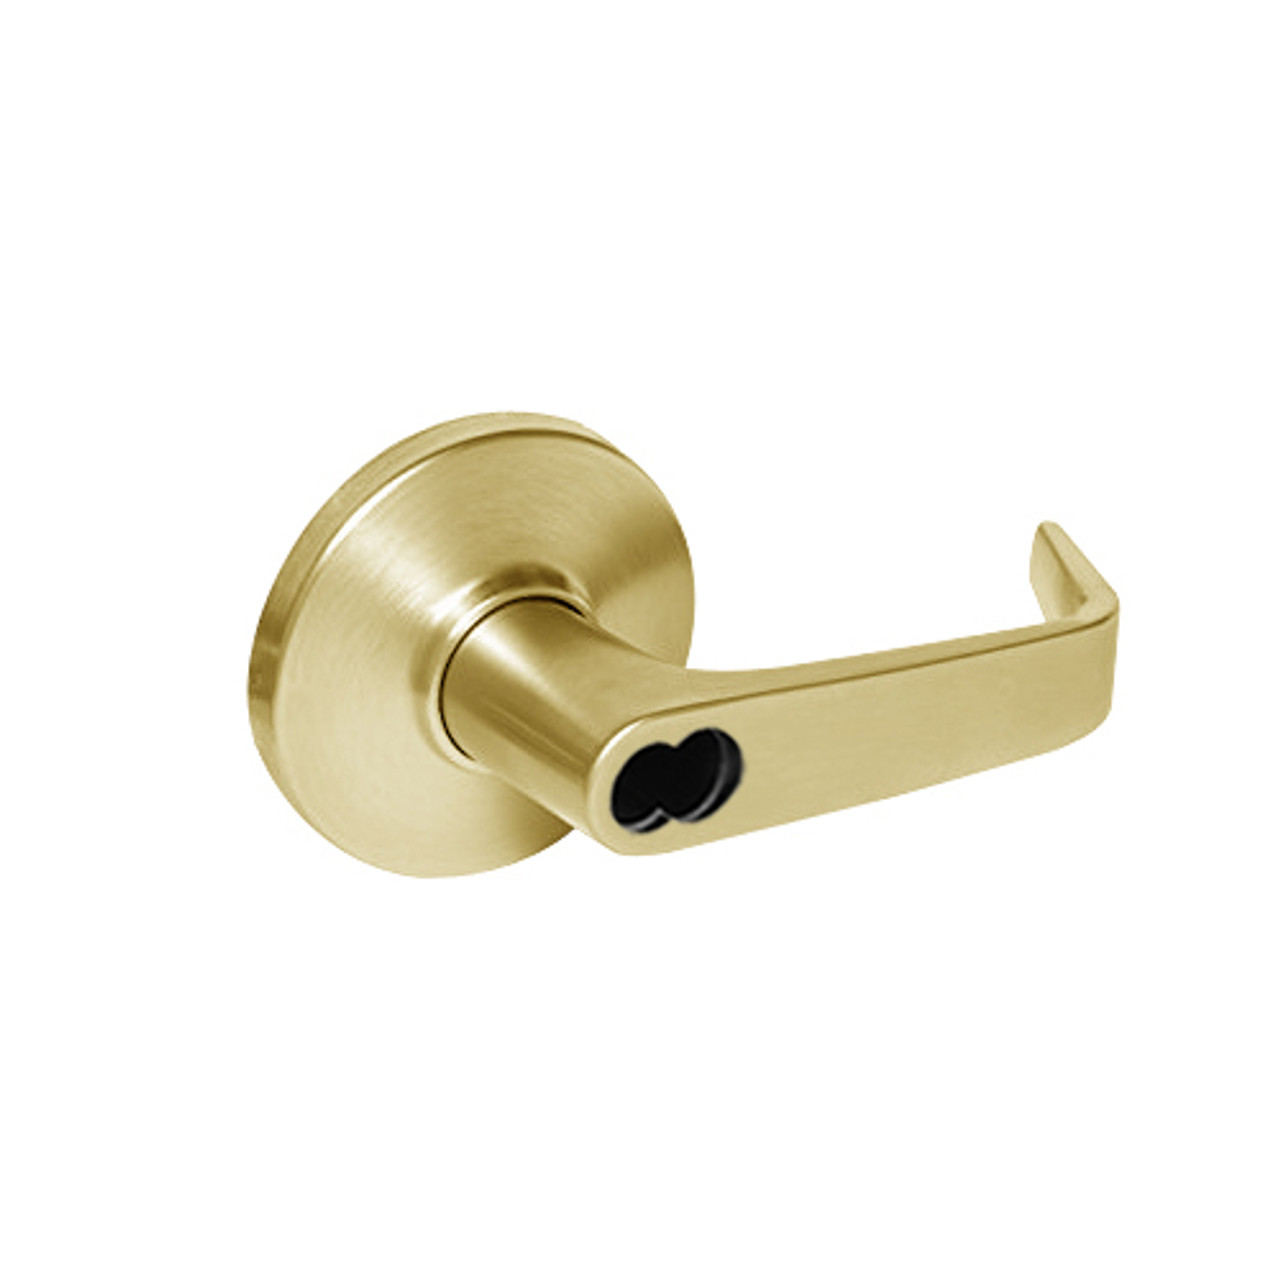 9K37YR15DS3605 Best 9K Series Special Function Cylindrical Lever Locks with Contour Angle with Return Lever Design Accept 7 Pin Best Core in Bright Brass